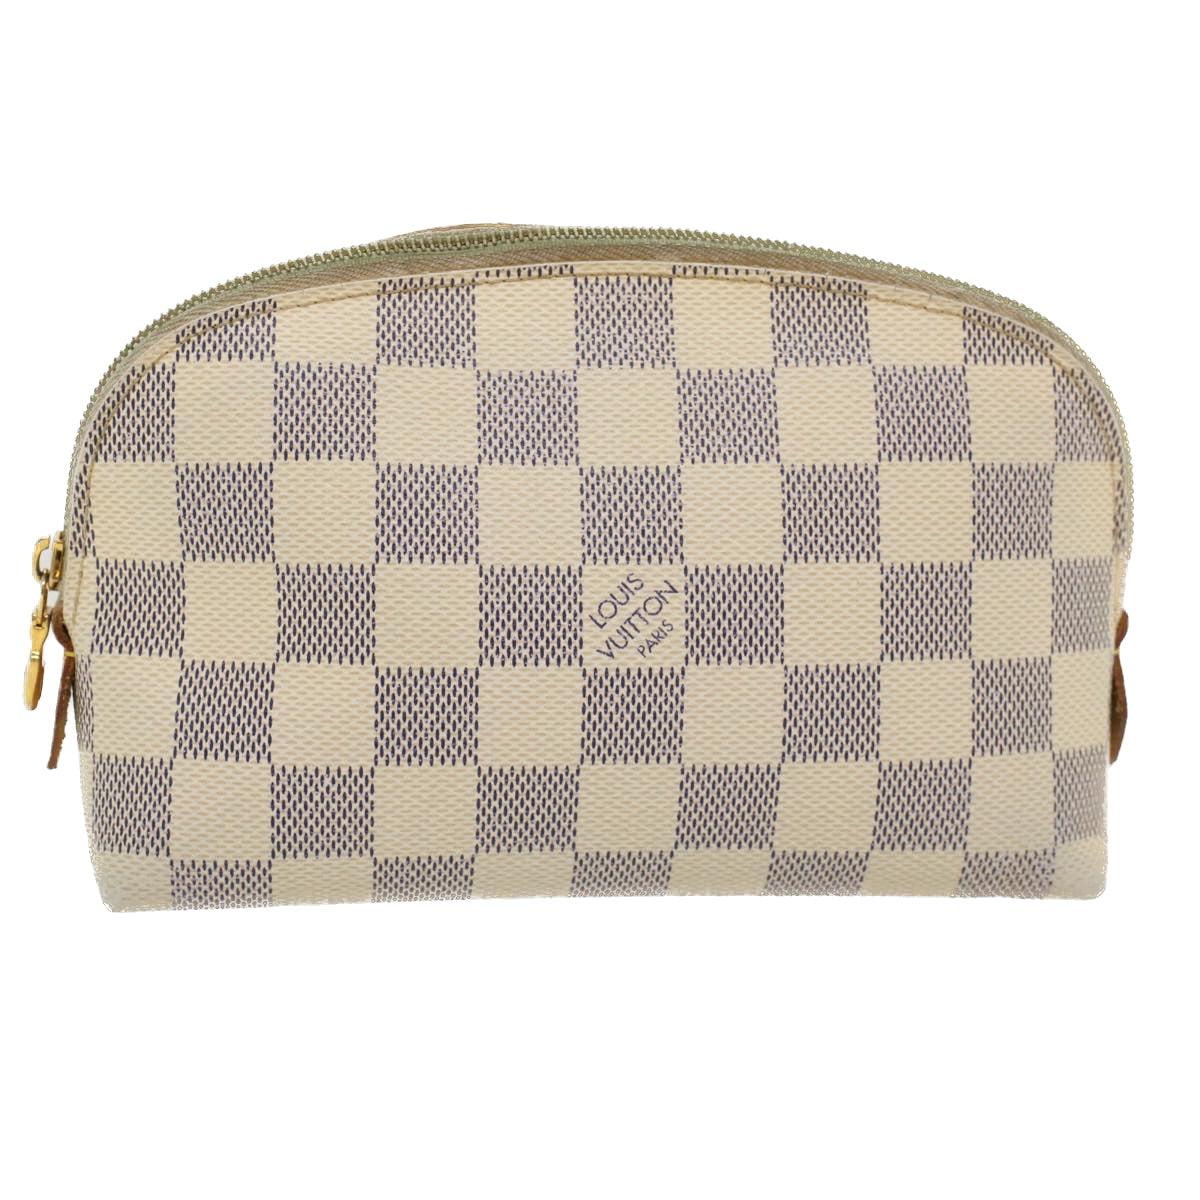 Louis Vuitton Wapity White Canvas Clutch Bag (Pre-Owned)